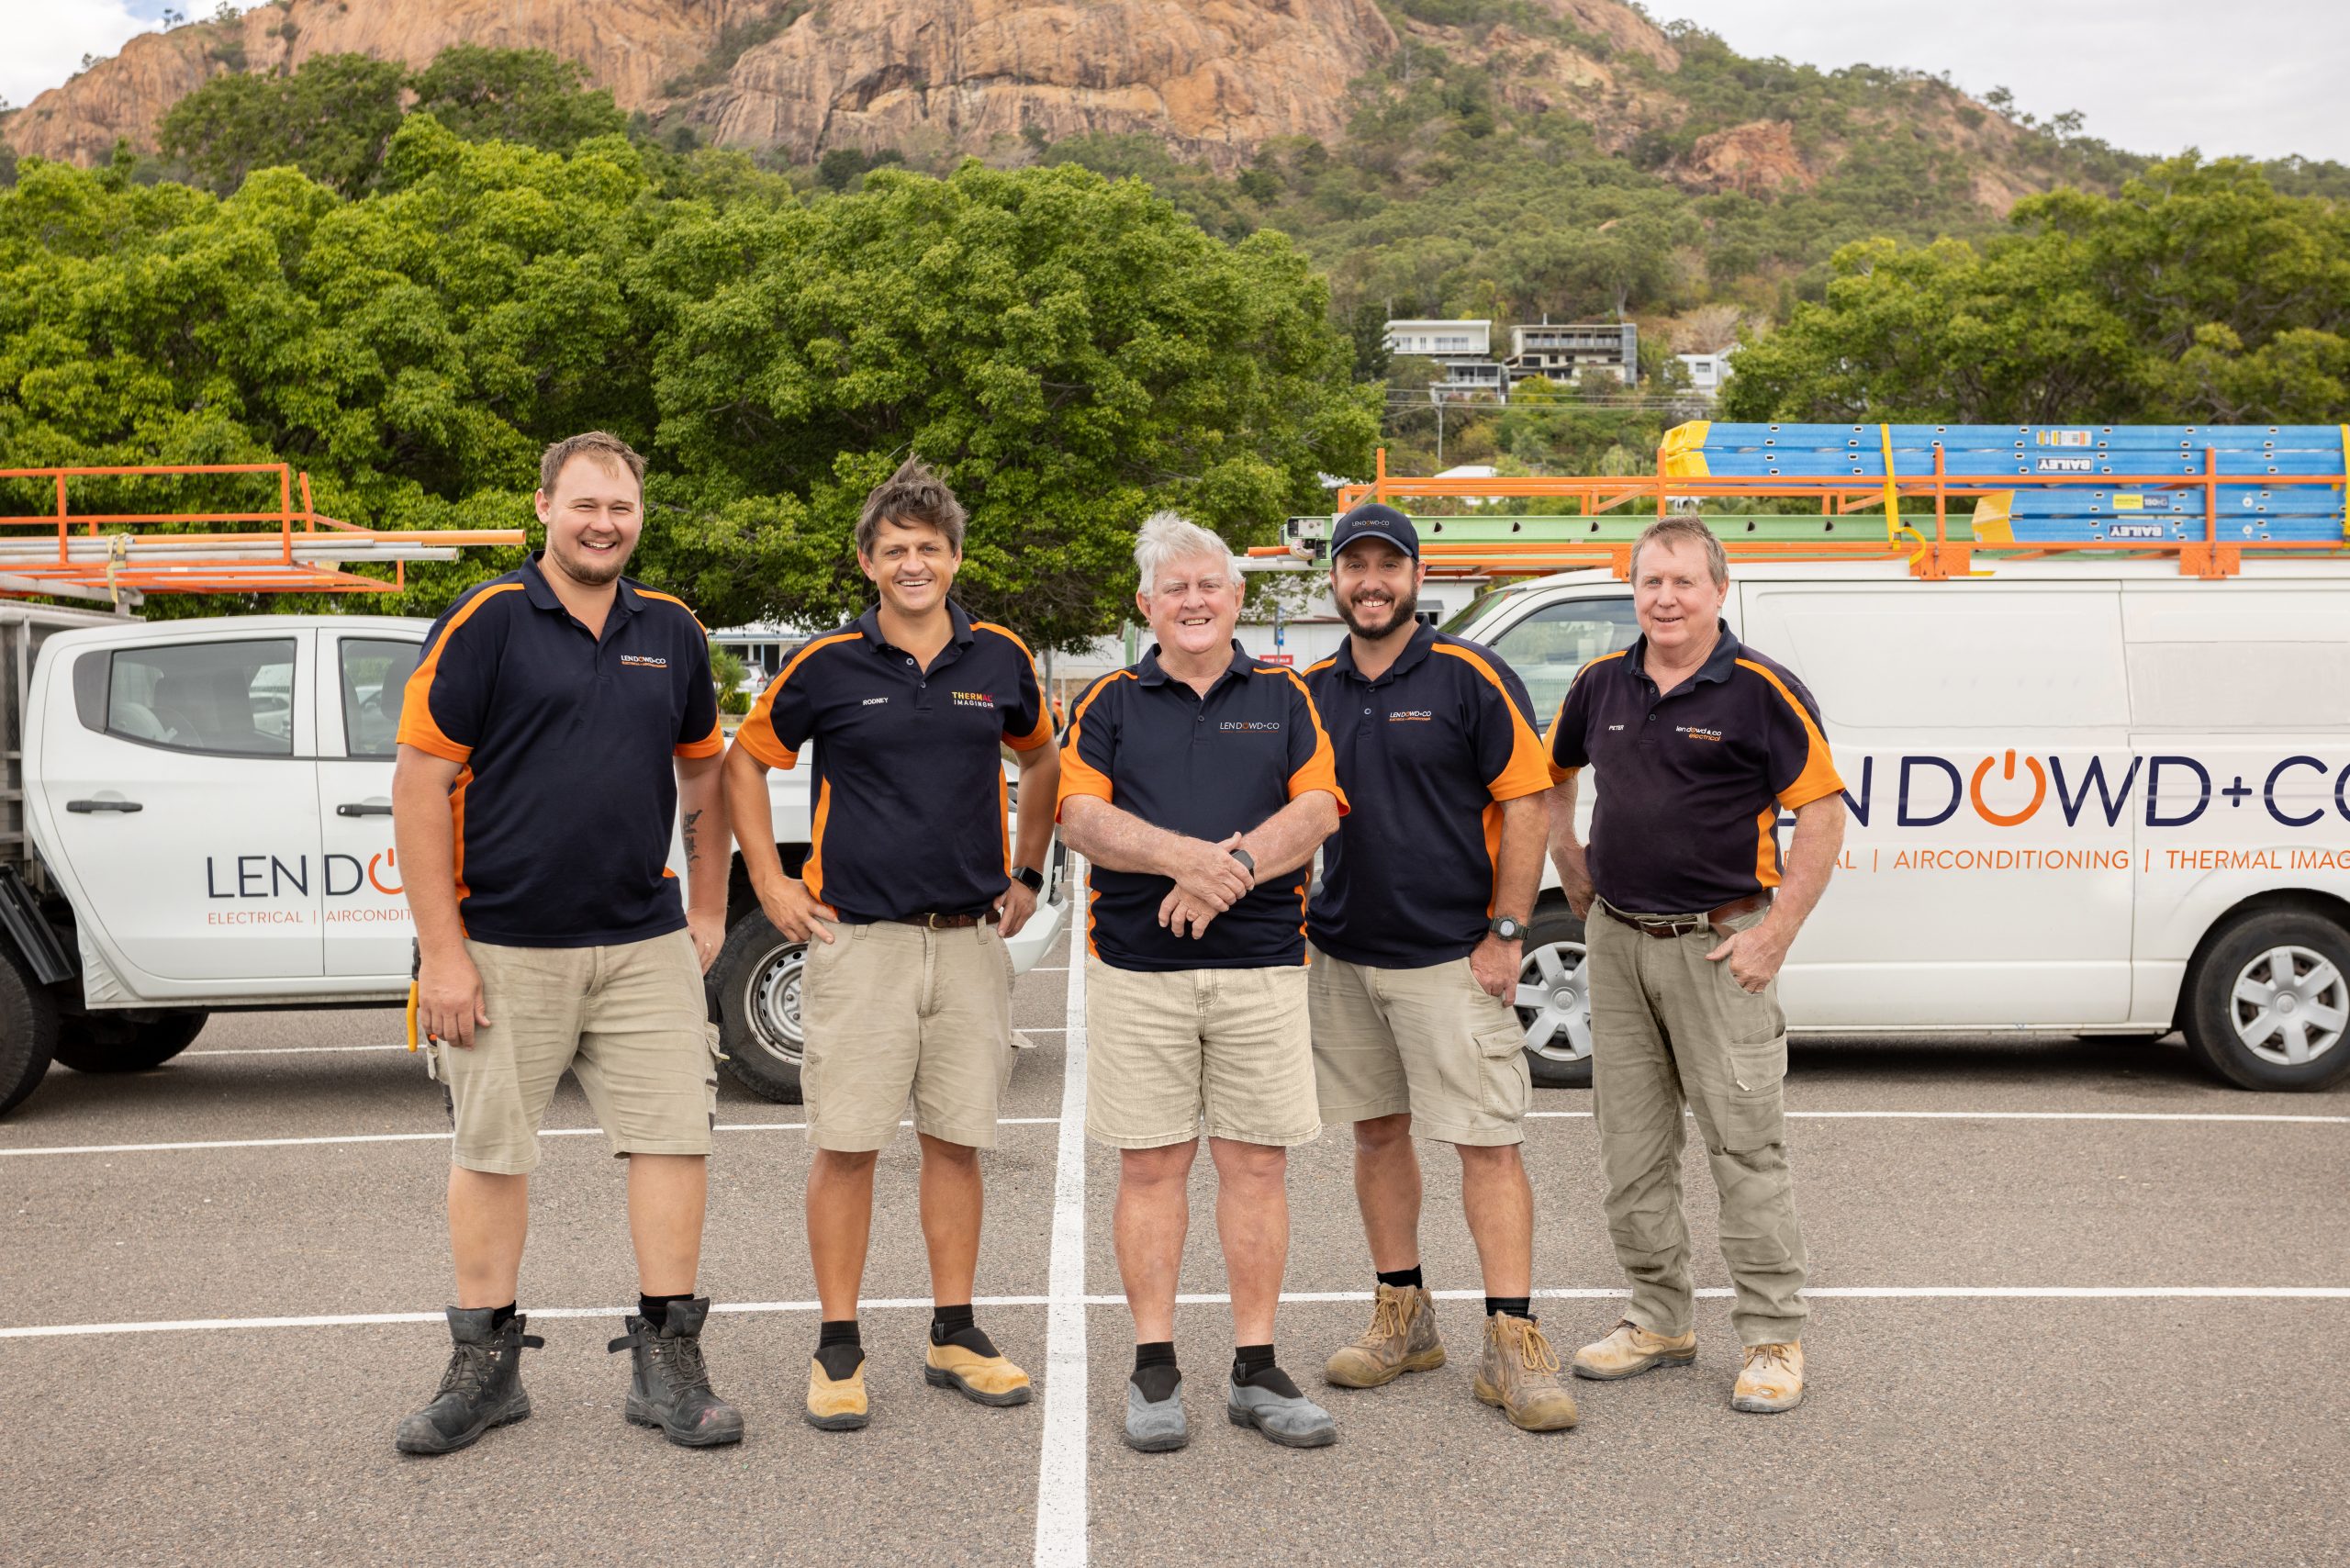 len dowd electrician townsville electrical airconditioning thermal imaging coreteam3 scaled - Len Dowd and Co - Townsville - Queensland